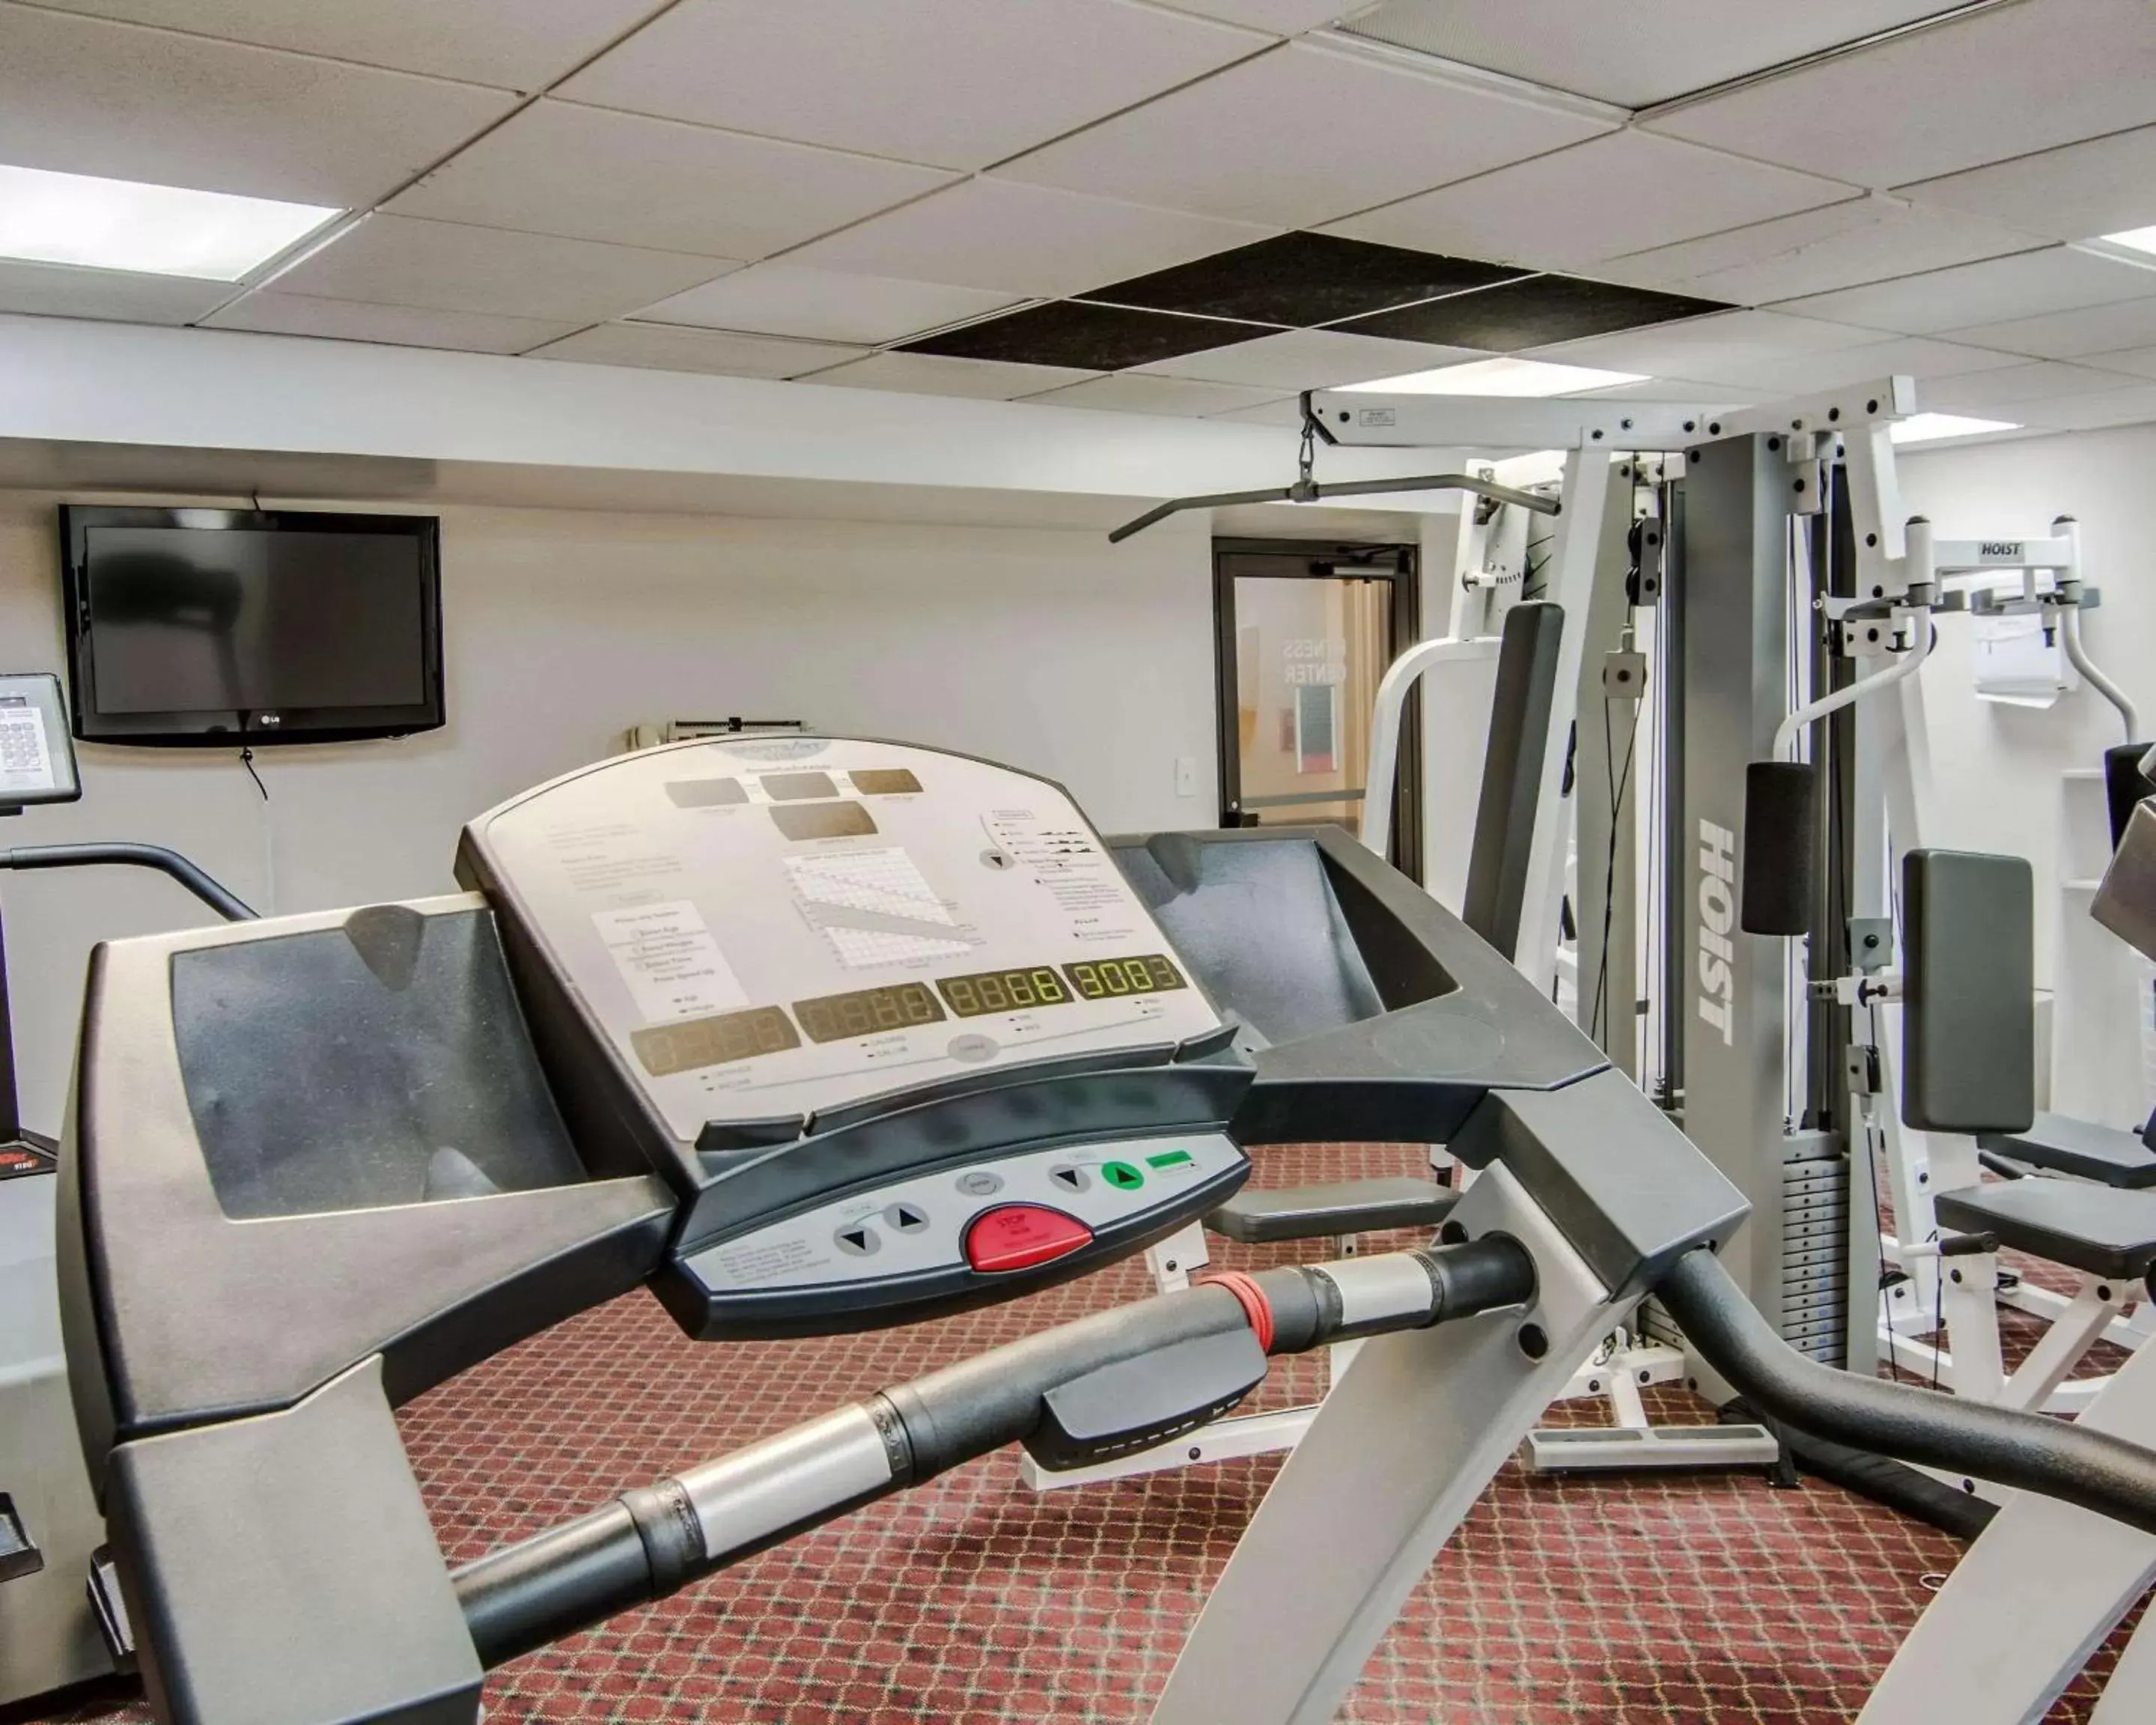 Fitness centre/facilities, Fitness Center/Facilities in Quality Hotel and Conference Center